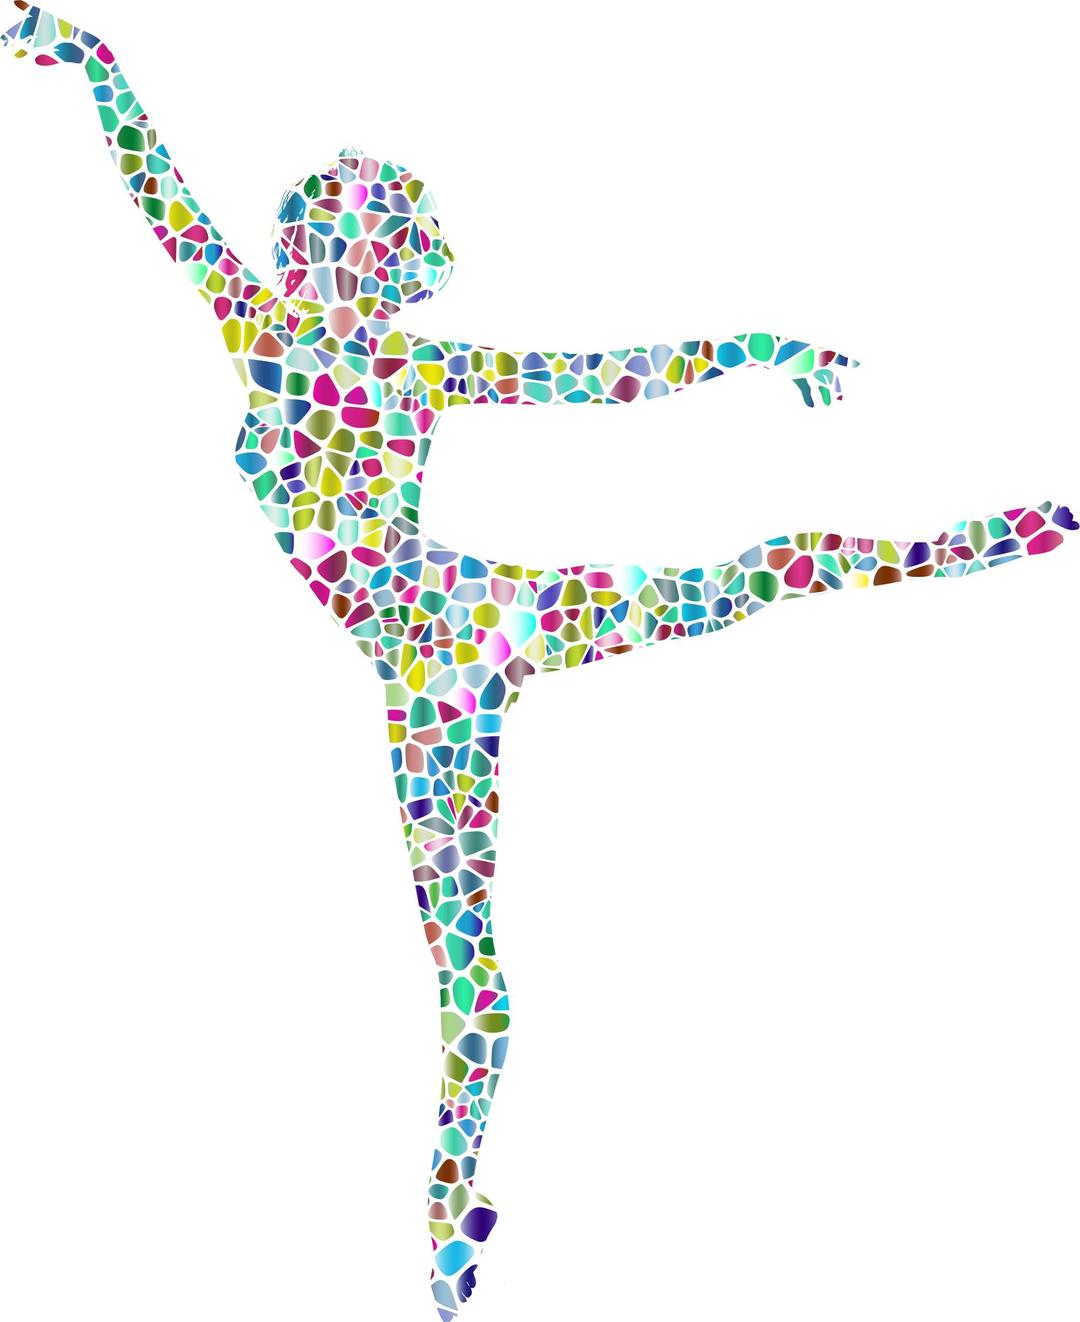 Polychromatic Tiled Lithe Dancing Woman Silhouette 2 No Background png transparent